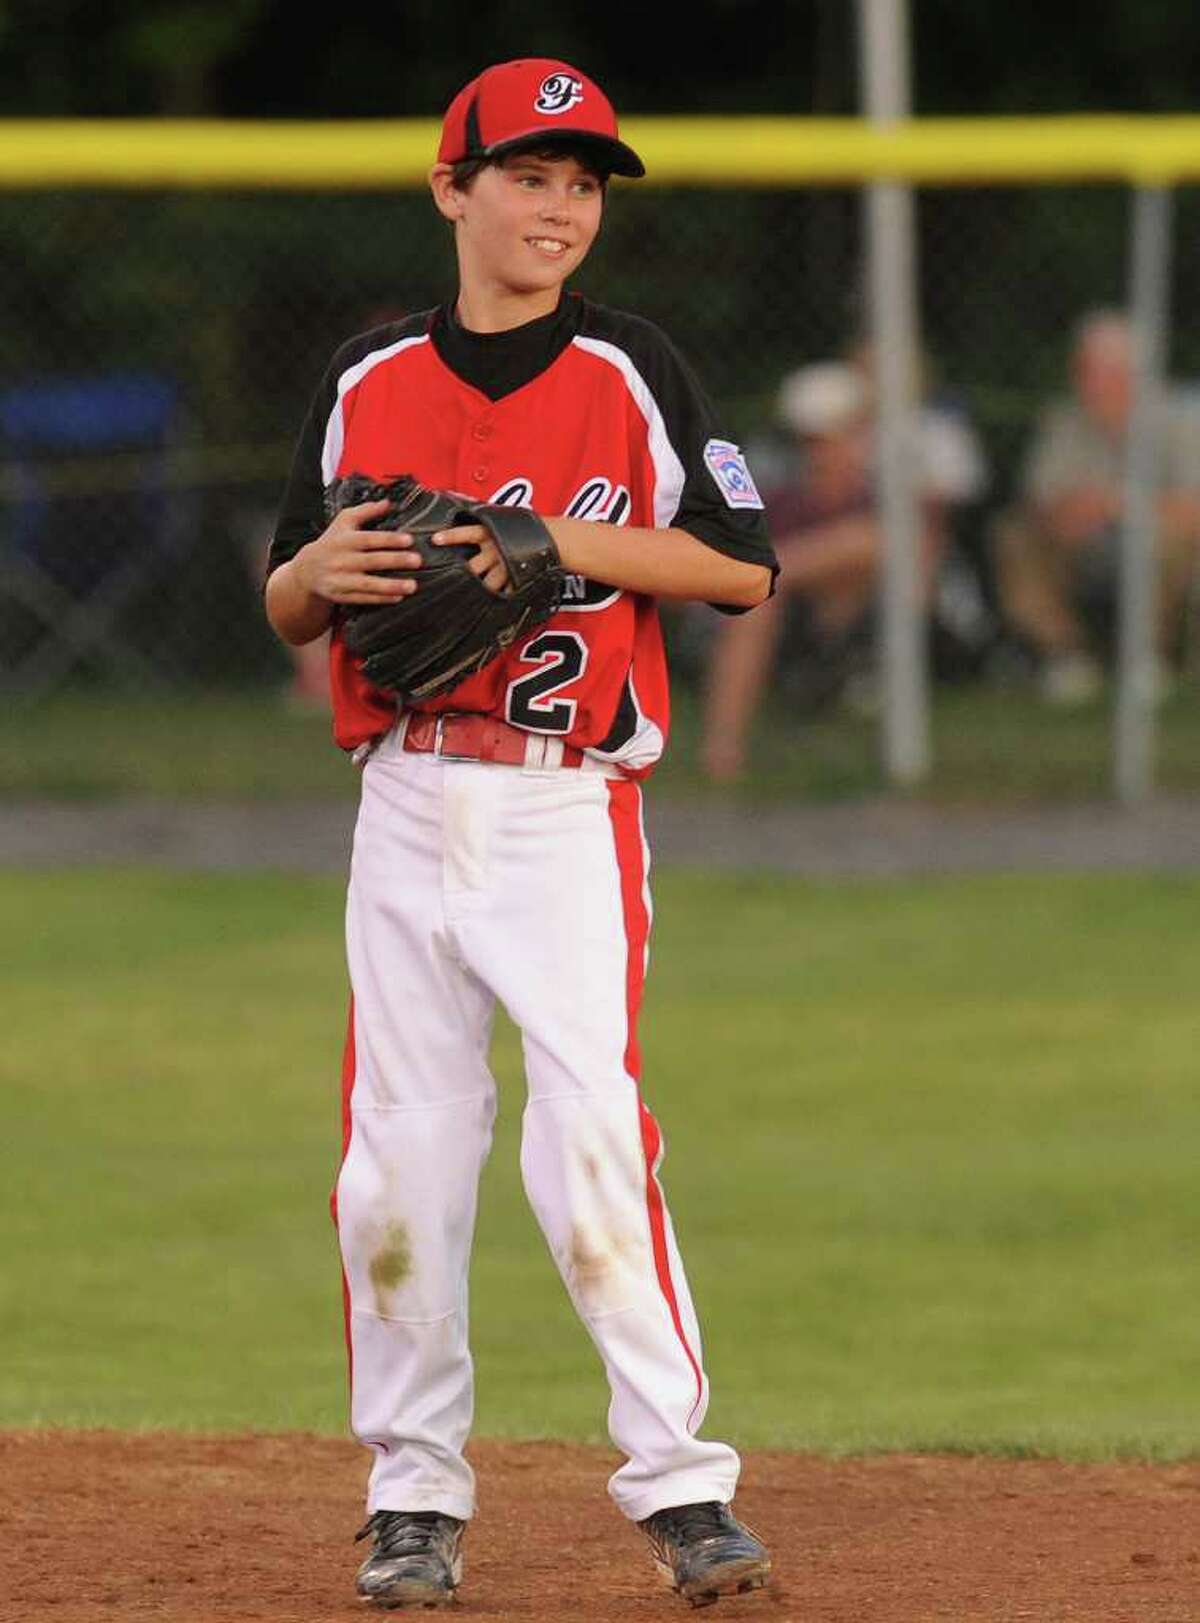 Fairfield American victory over Yarmouth, Maine at the Little League Eastern Regional in Bristol on Monday, August 8, 2011. Connor Lynch.